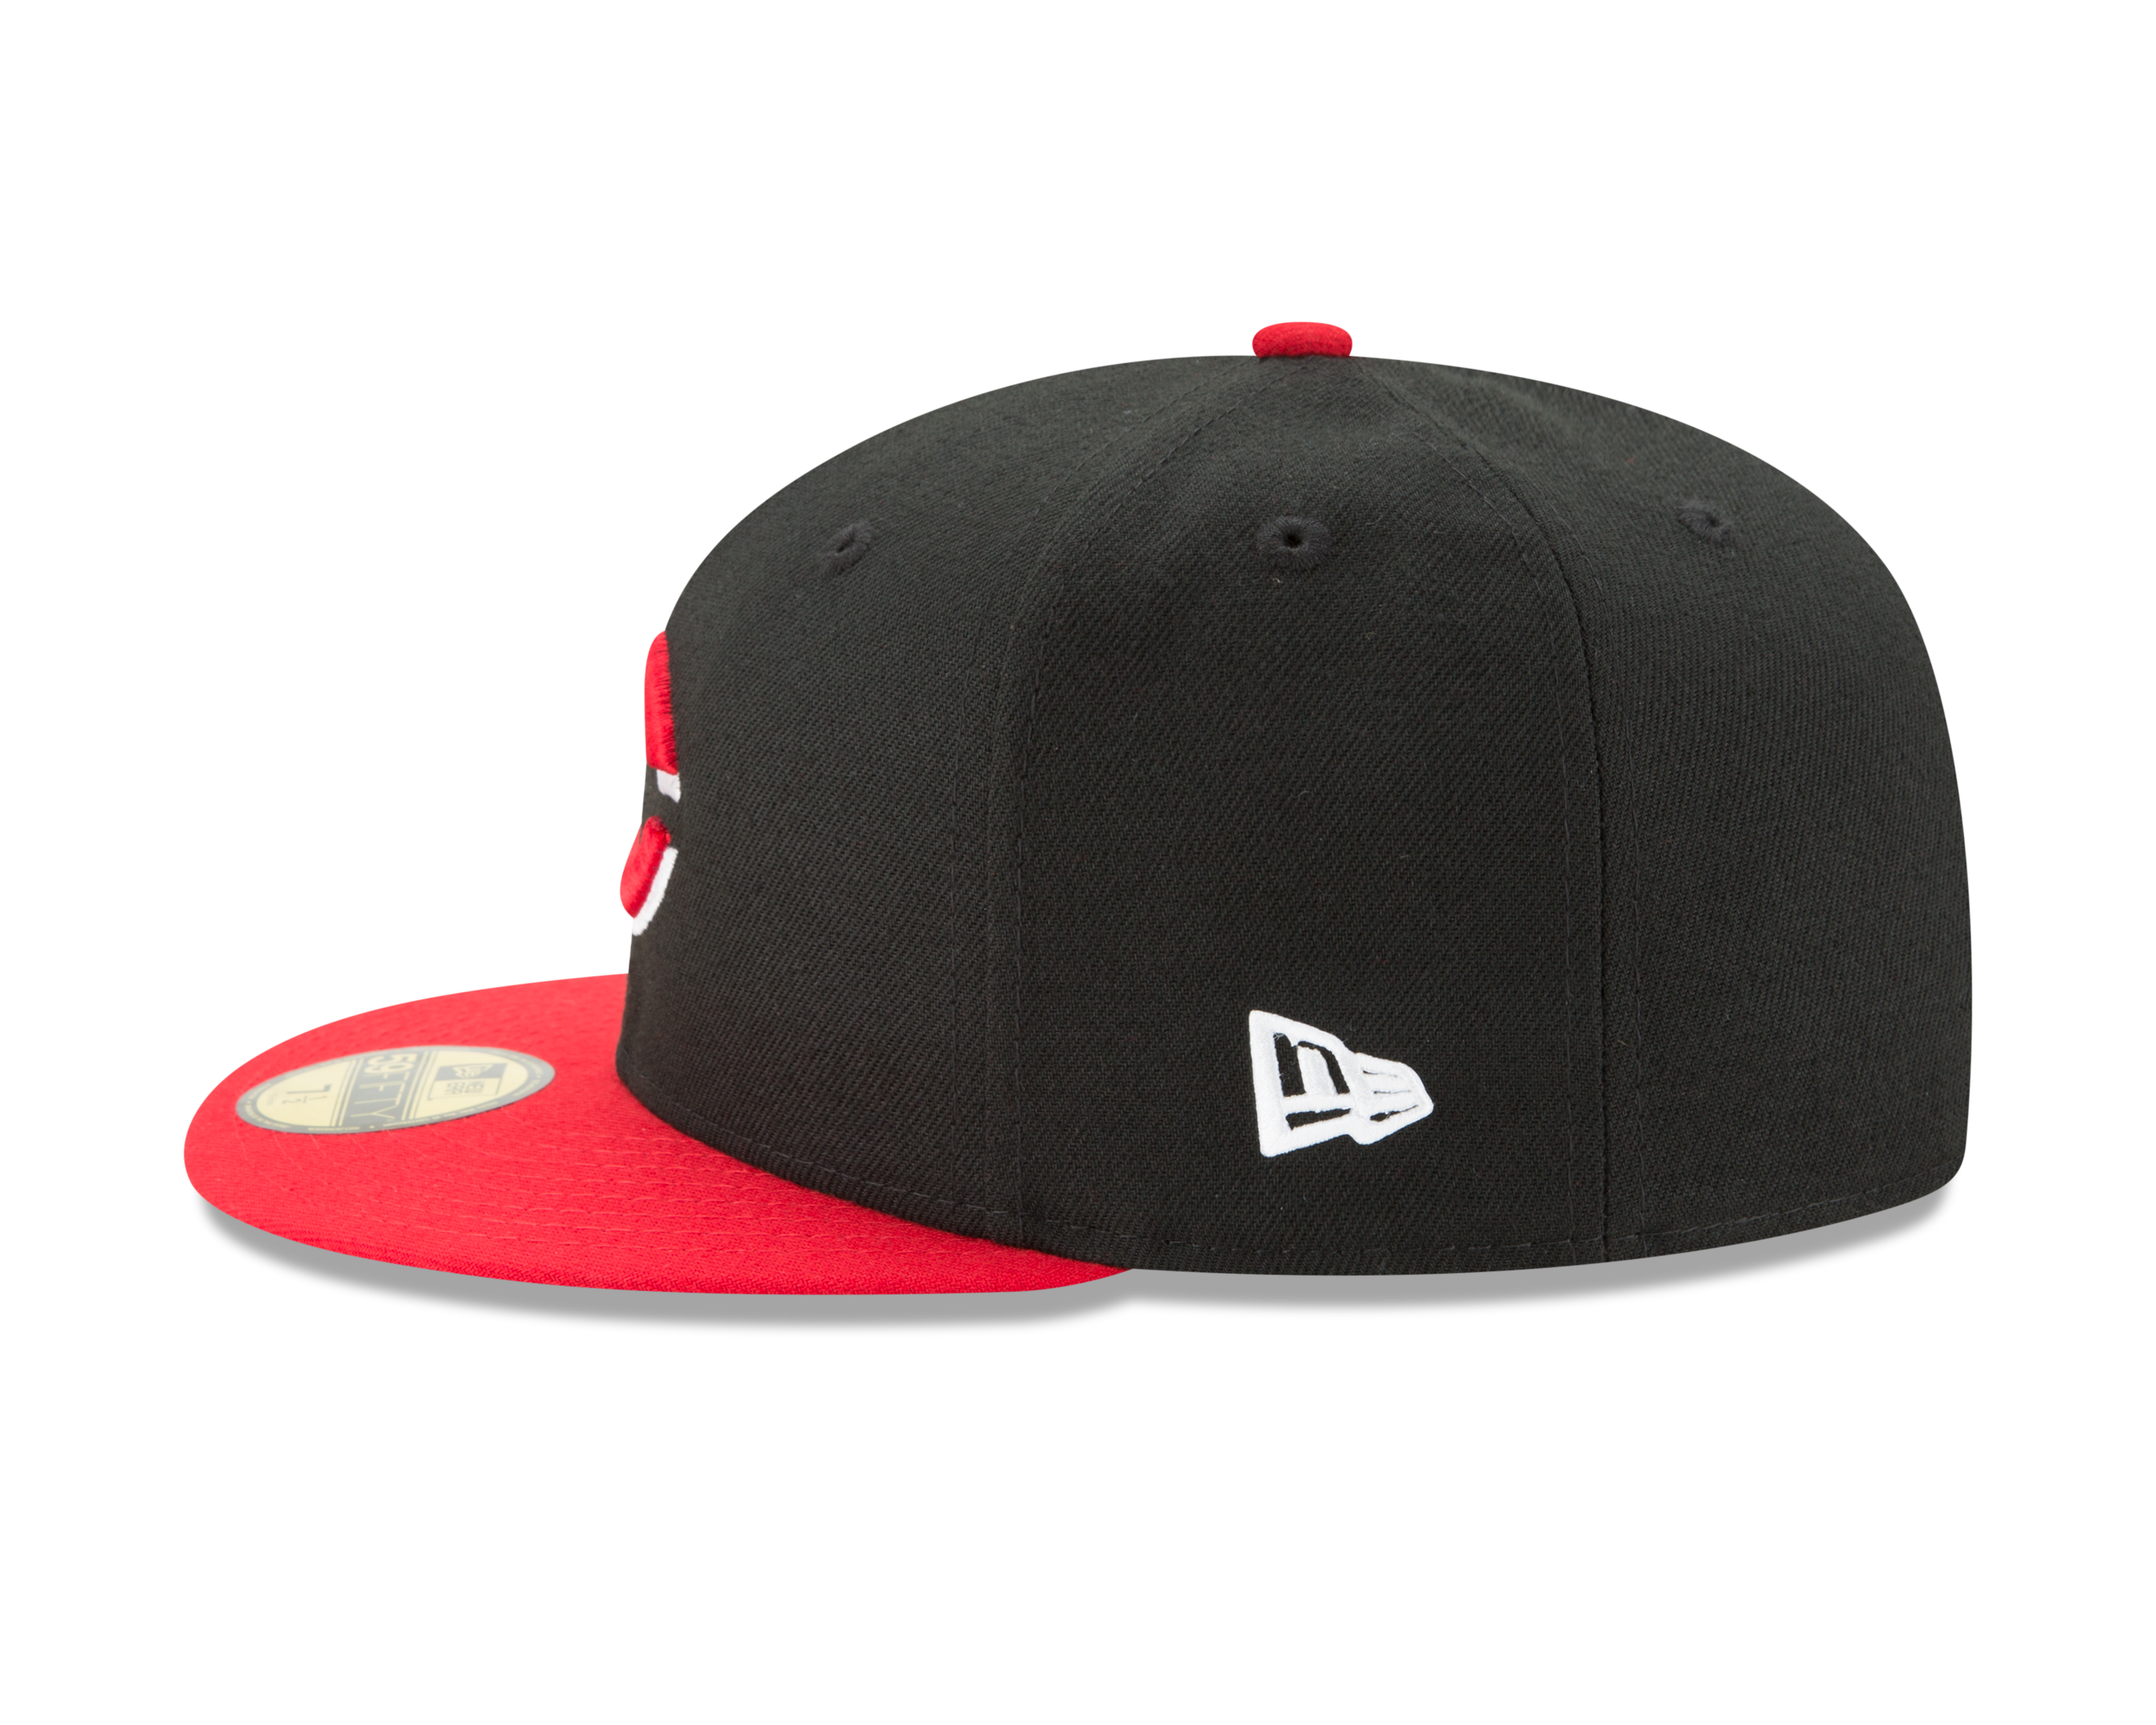 New Era Cincinnati Reds Authentic Collection 59FIFTY Fitted Hat - Hibbett